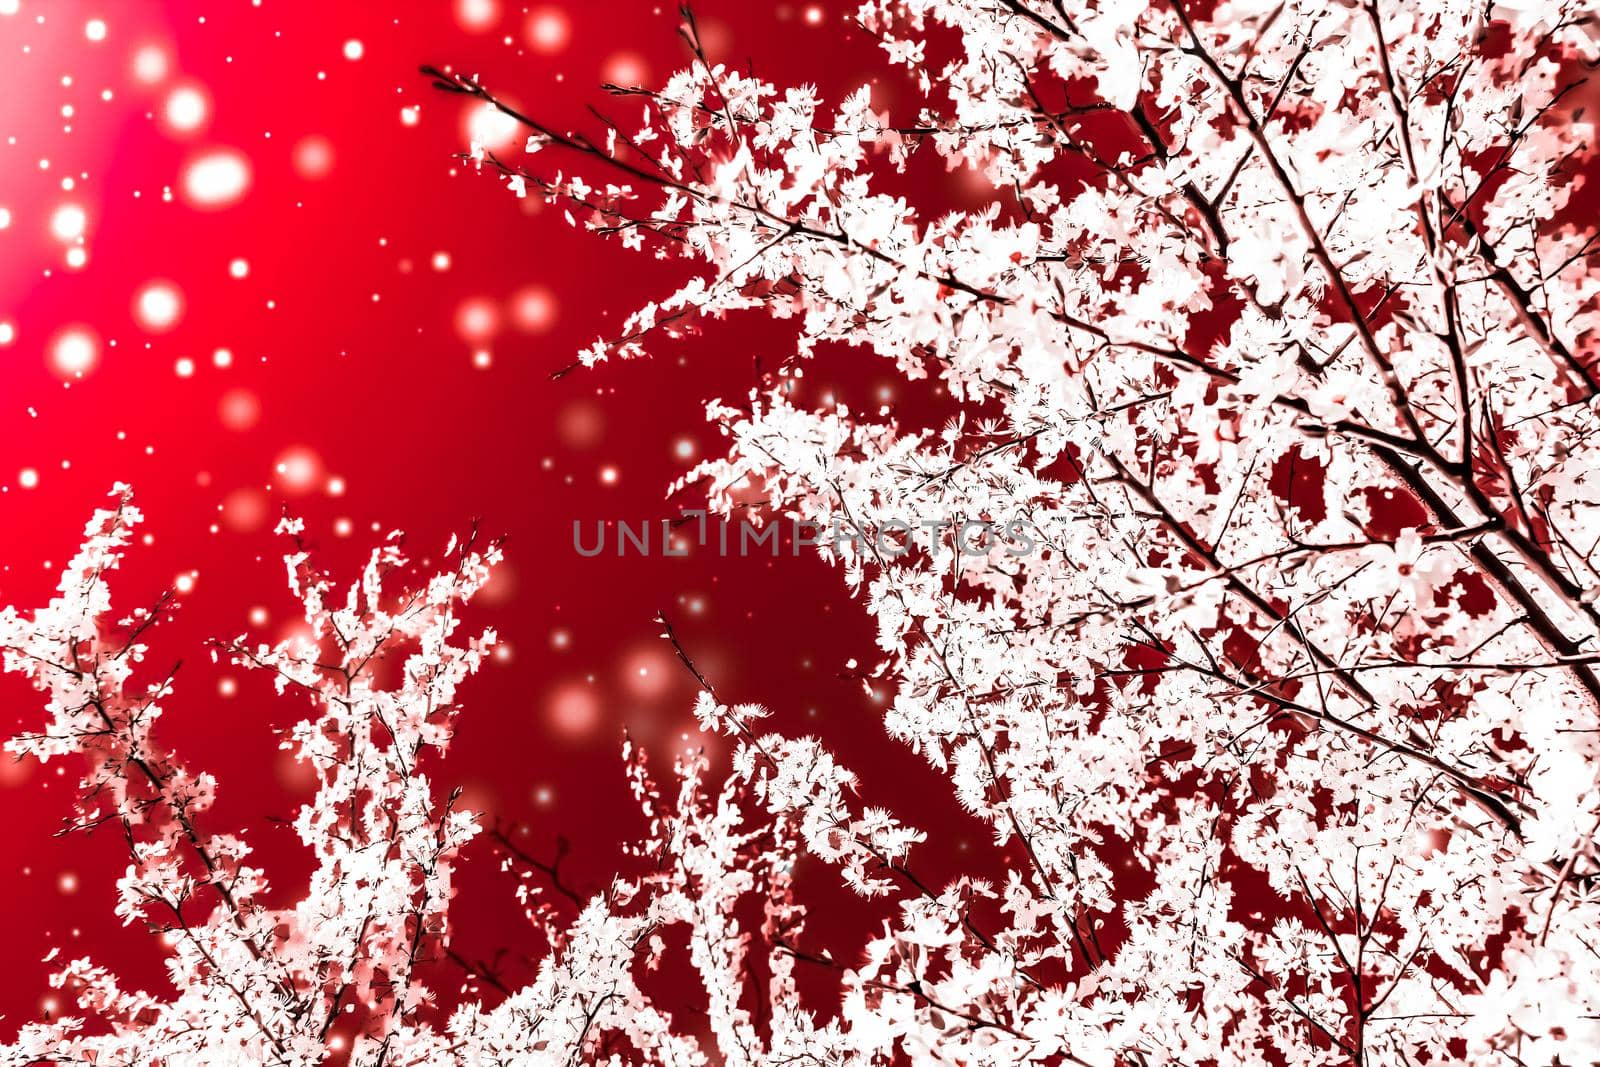 Branding, magic and festive concept - Christmas, New Years red floral background, holiday card design, flower tree and snow glitter as winter season sale promotion backdrop for luxury beauty brand